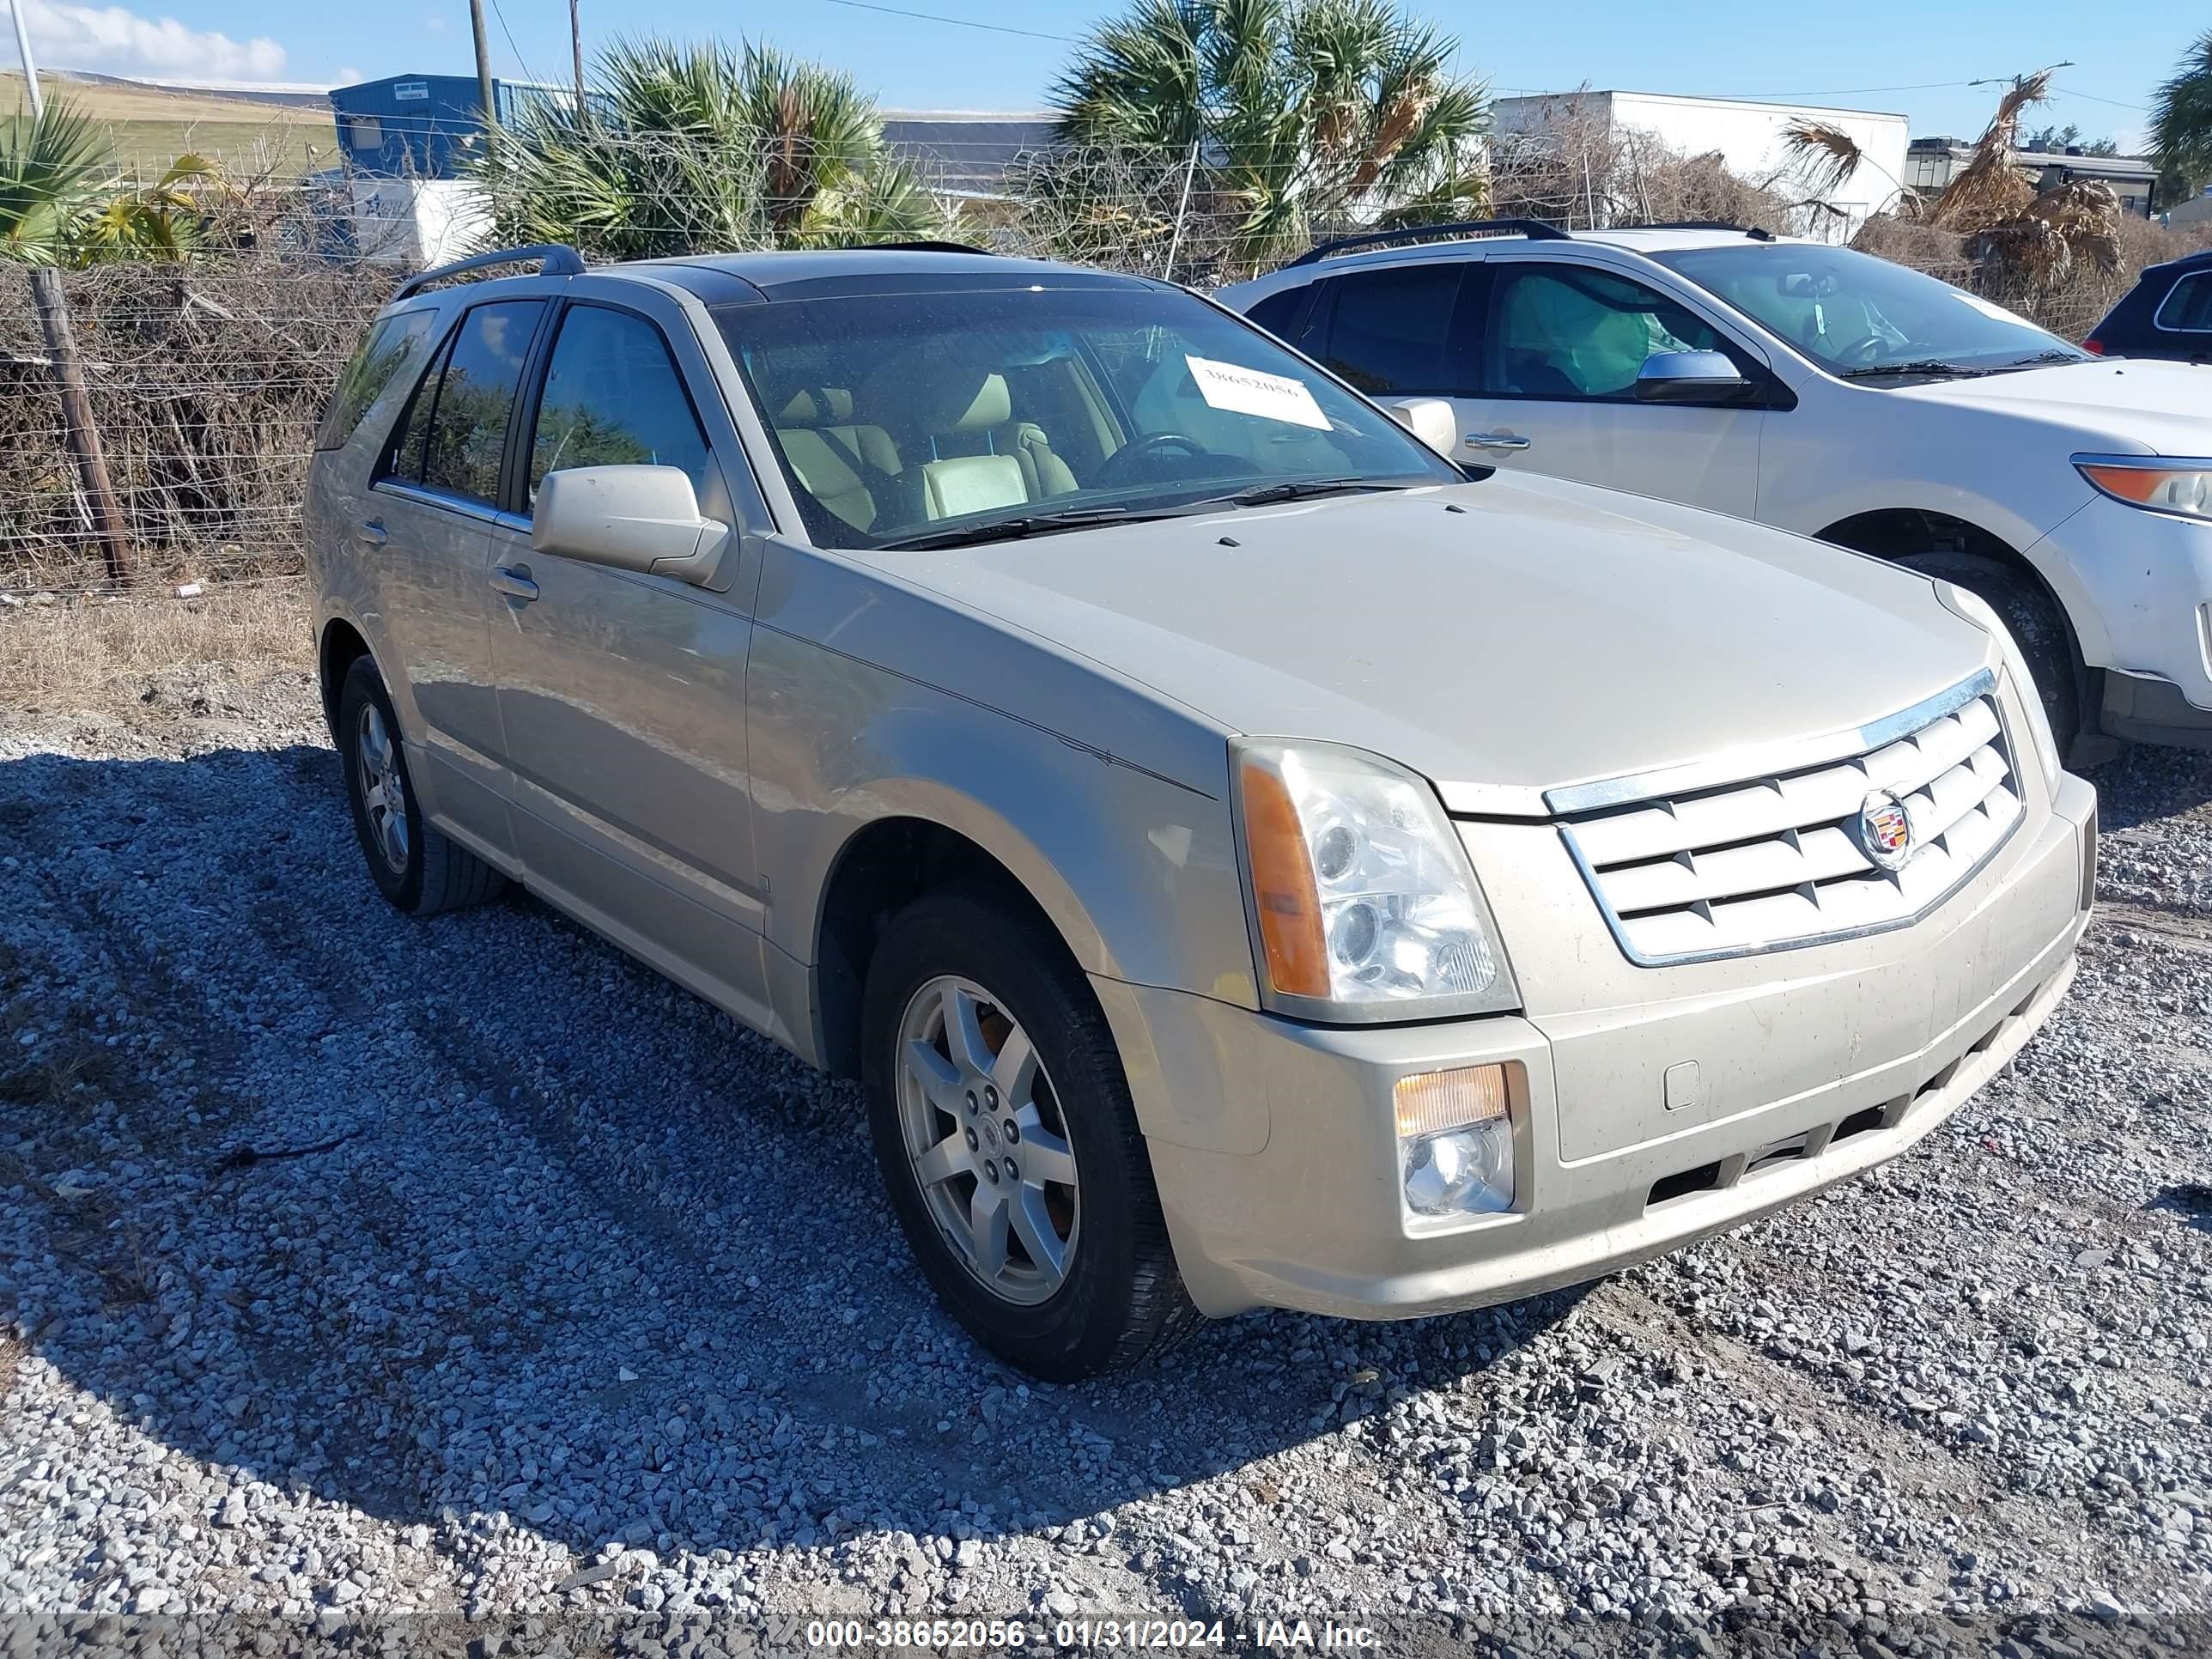 vin: 1GYEE637680183106 1GYEE637680183106 2008 cadillac srx 3600 for Sale in 33619, 6522 Old 41A Hwy, Tampa, Florida, USA